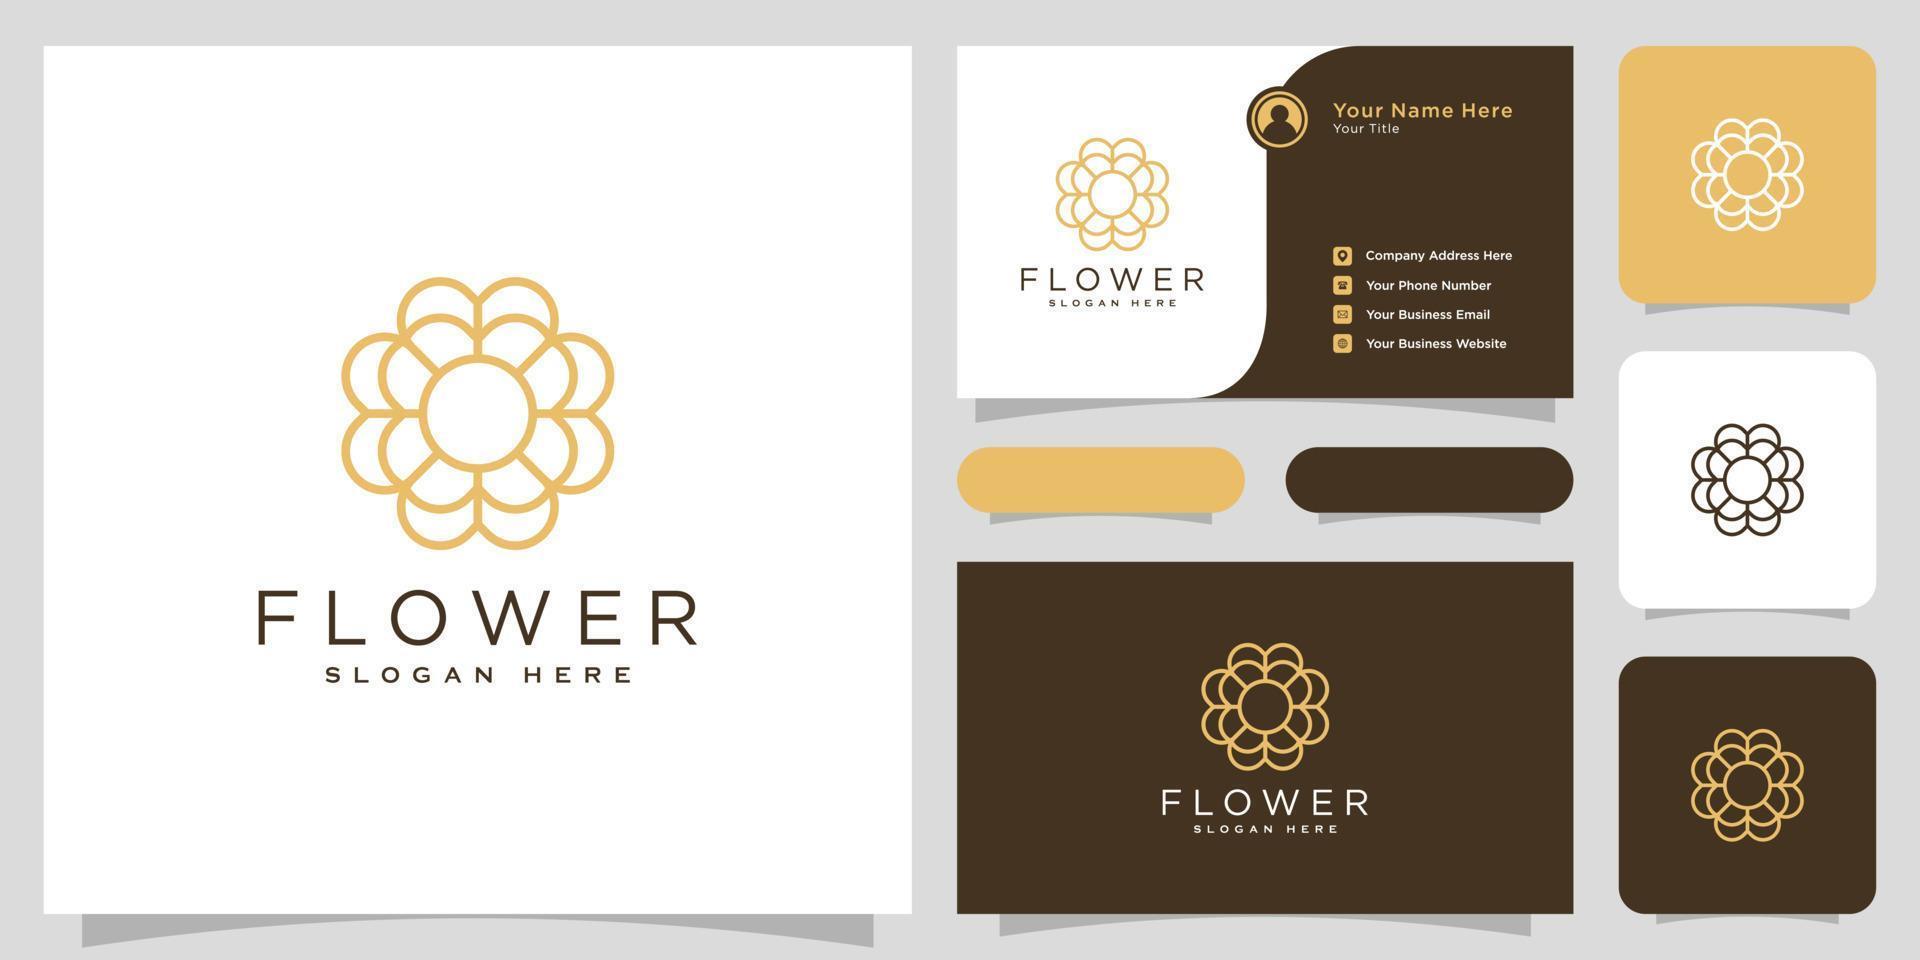 flower logo vector design line style and business card